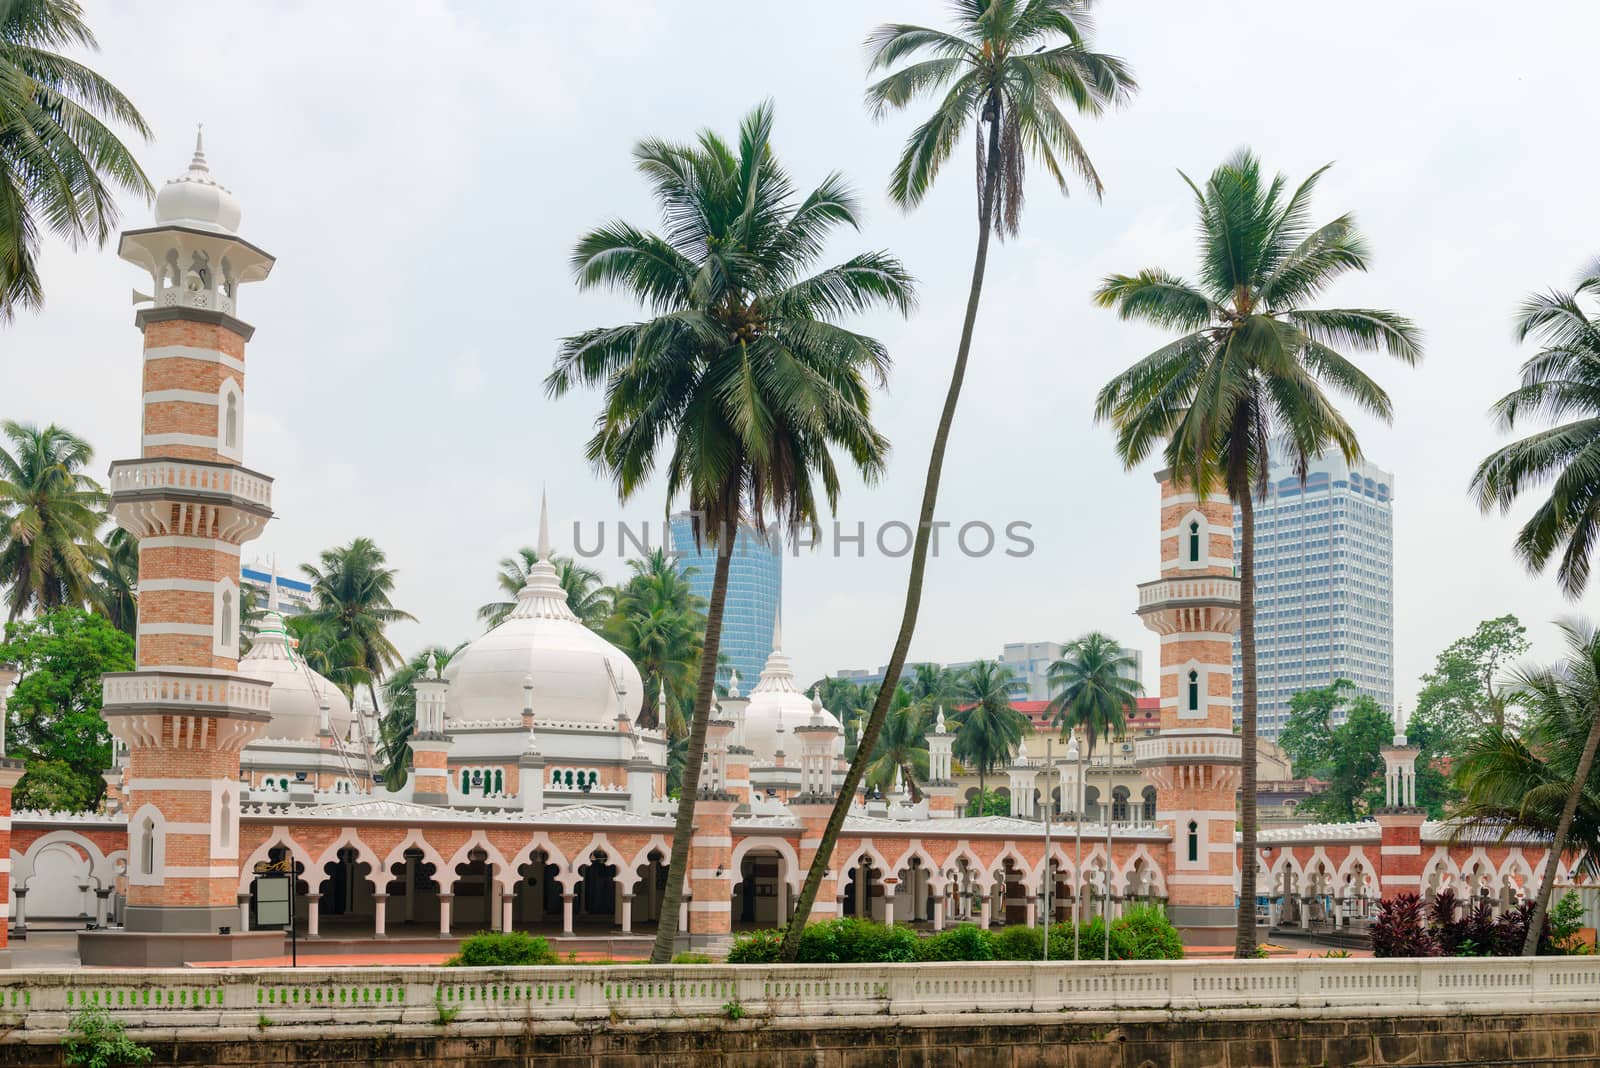 Jamek mosque is one of the oldest mosques in Kuala Lumpur, Malaysia